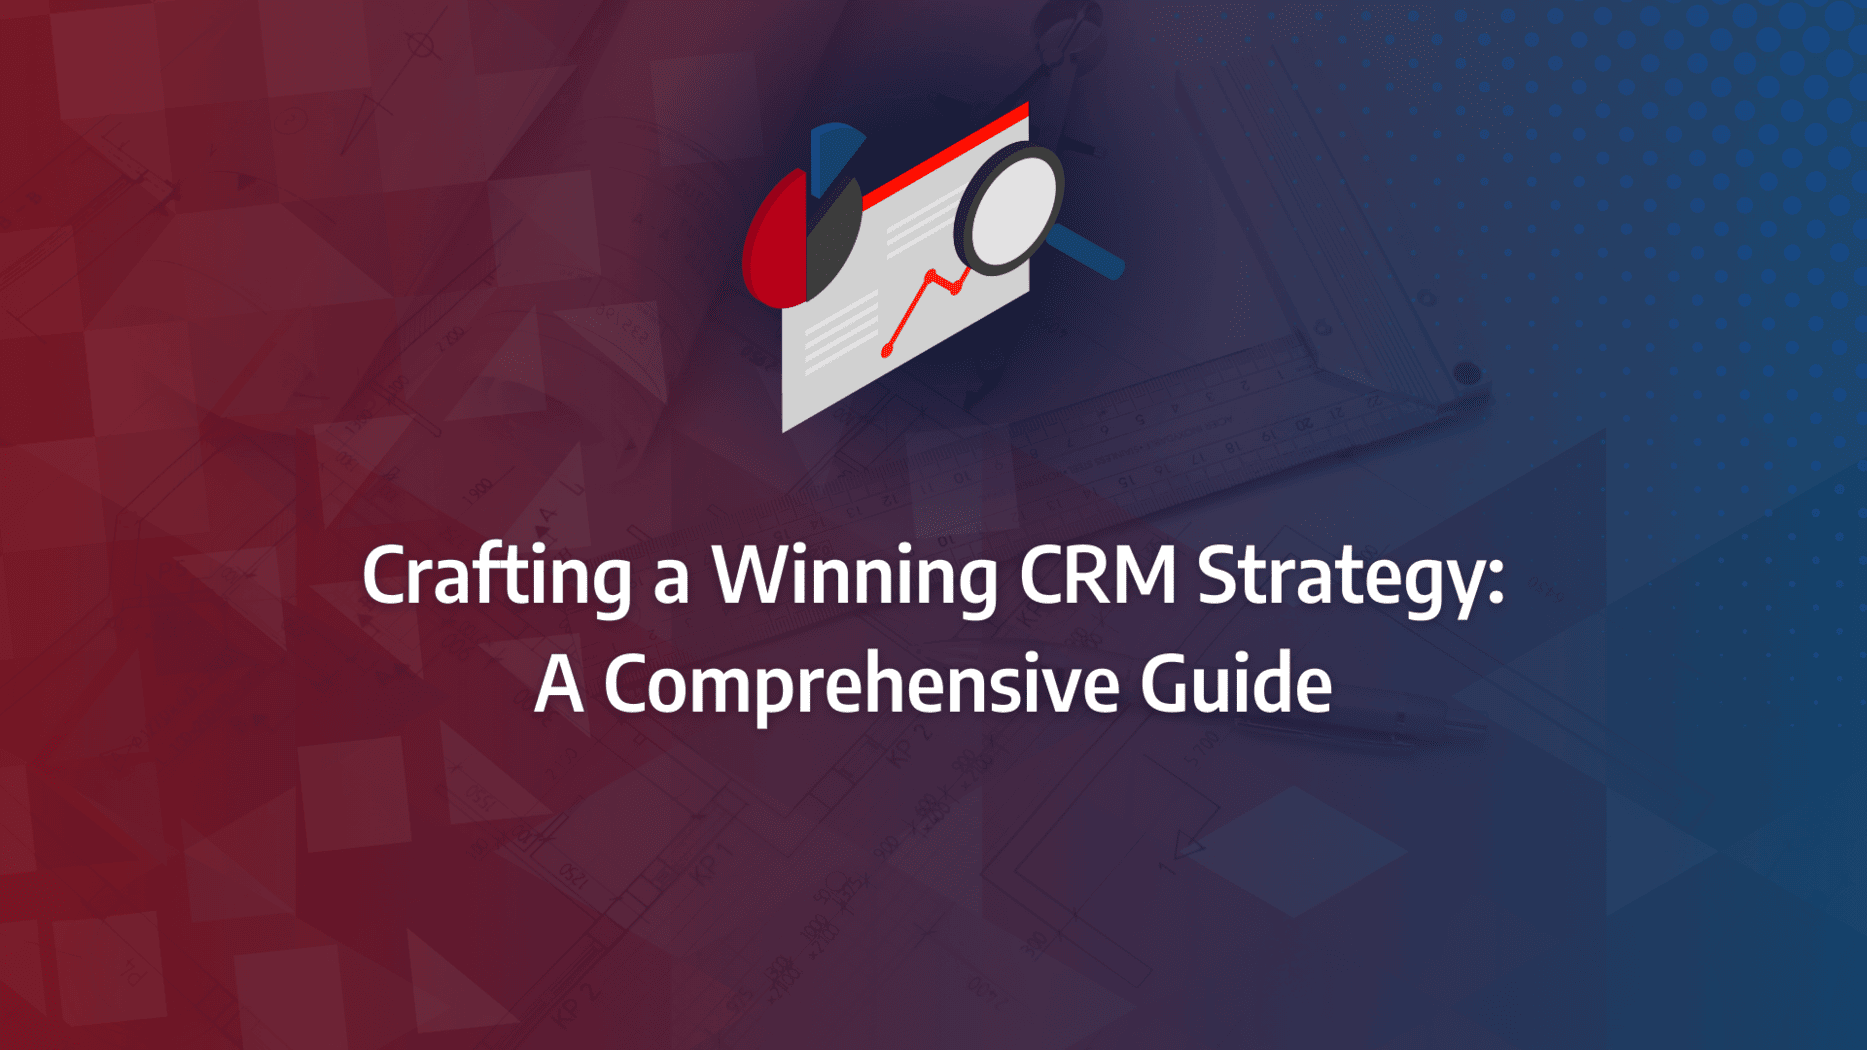 Implementing a CRM Strategy for B2B SaaS to Improve Business Performance: strategy framework diagram for crm strategy framework, crm marketing strategy, crm strategy development, crm strategy goals